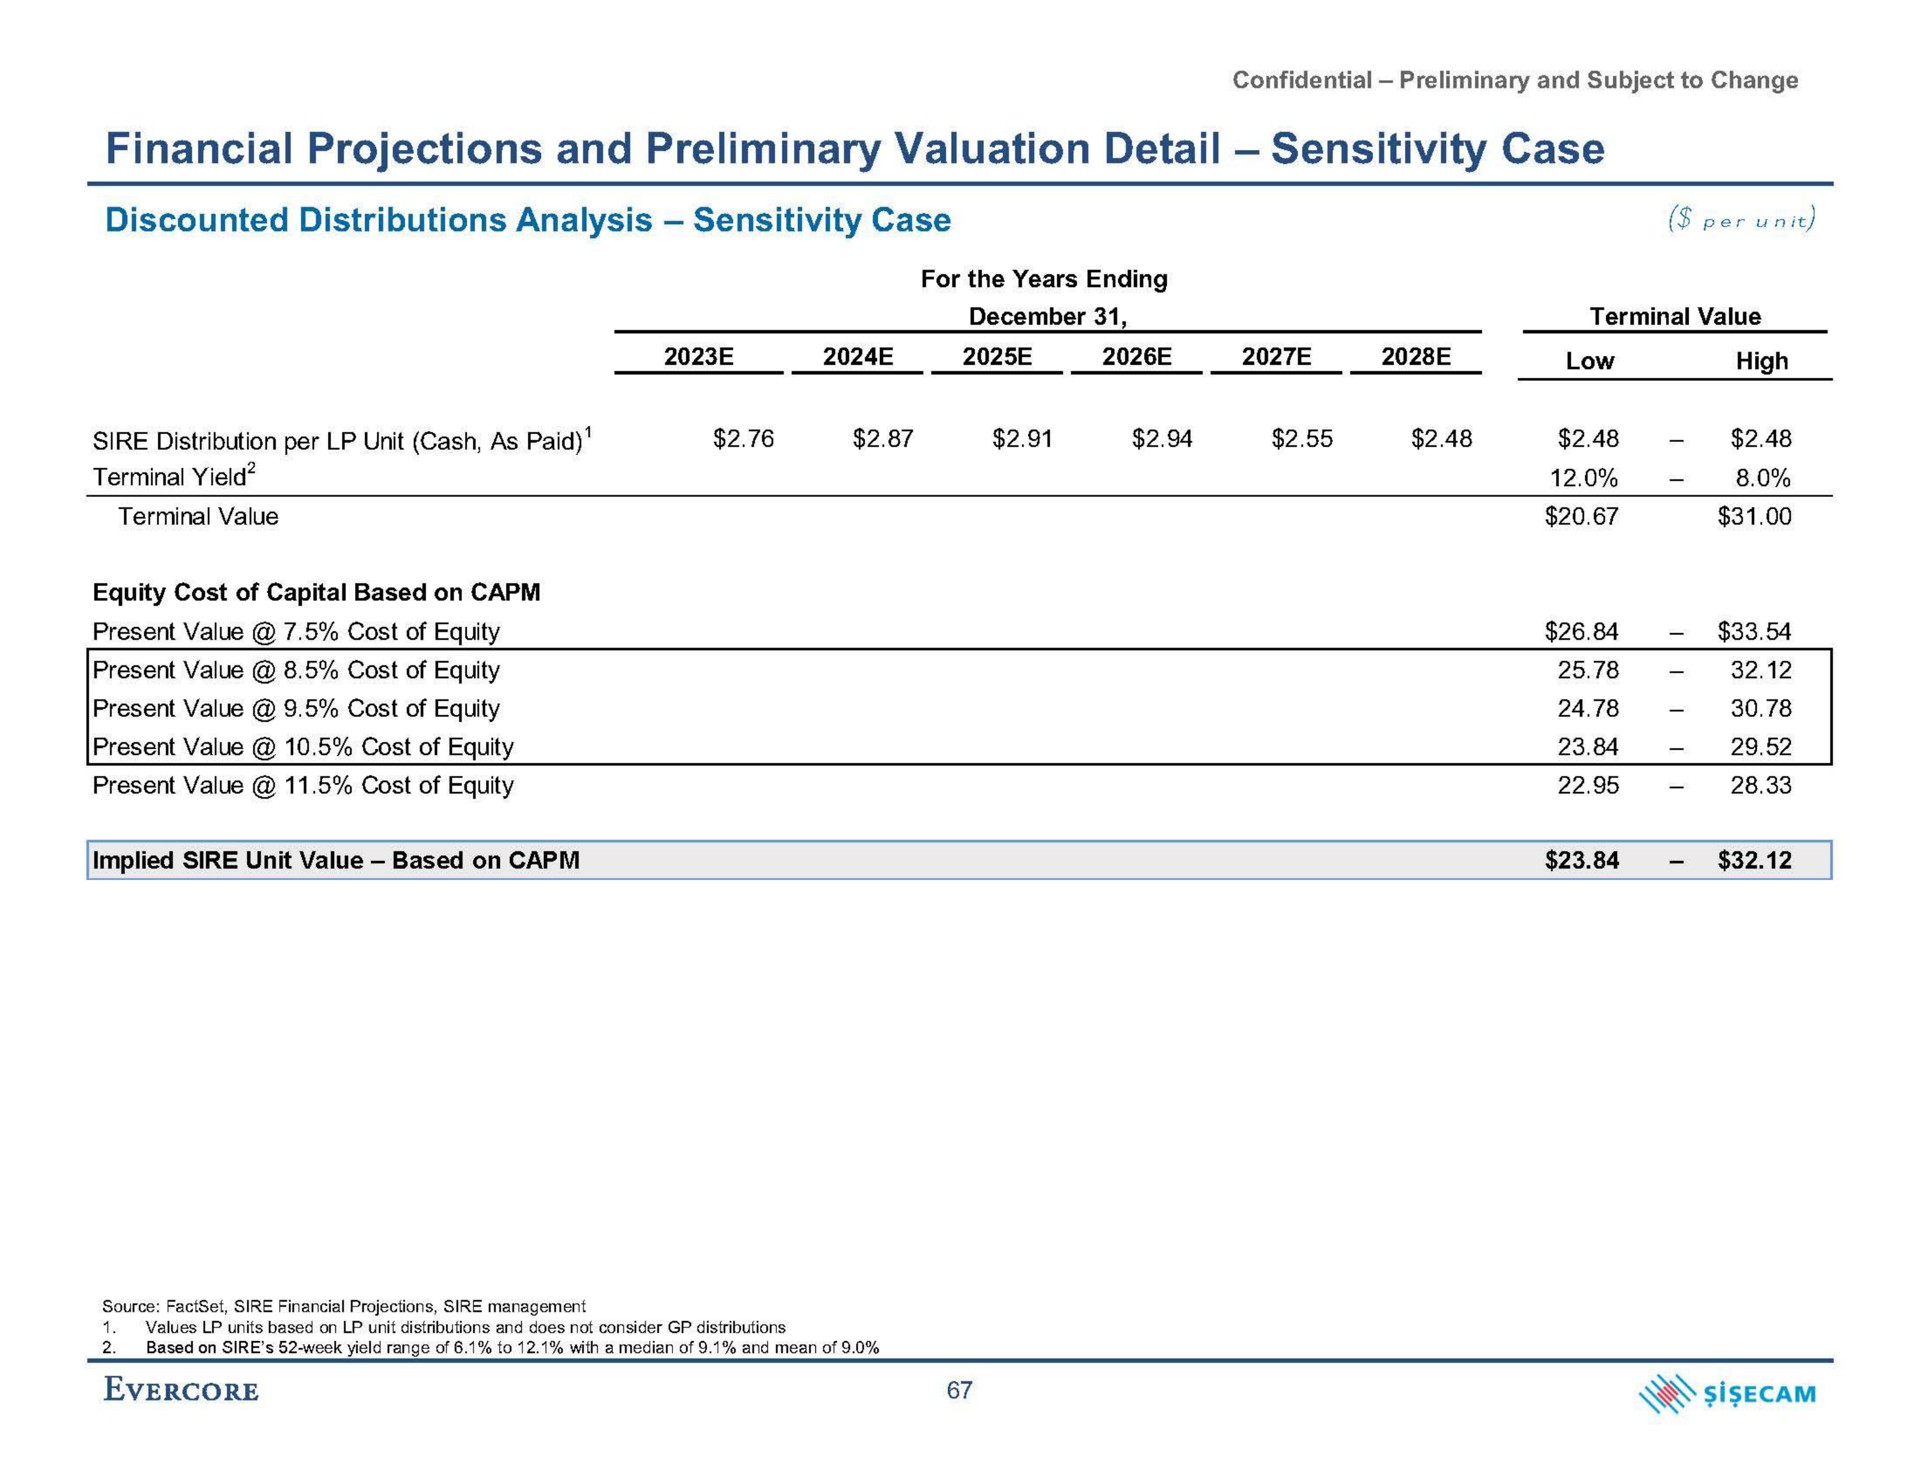 financial projections and preliminary valuation detail sensitivity case discounted distributions analysis sensitivity case per unit terminal yield | Evercore